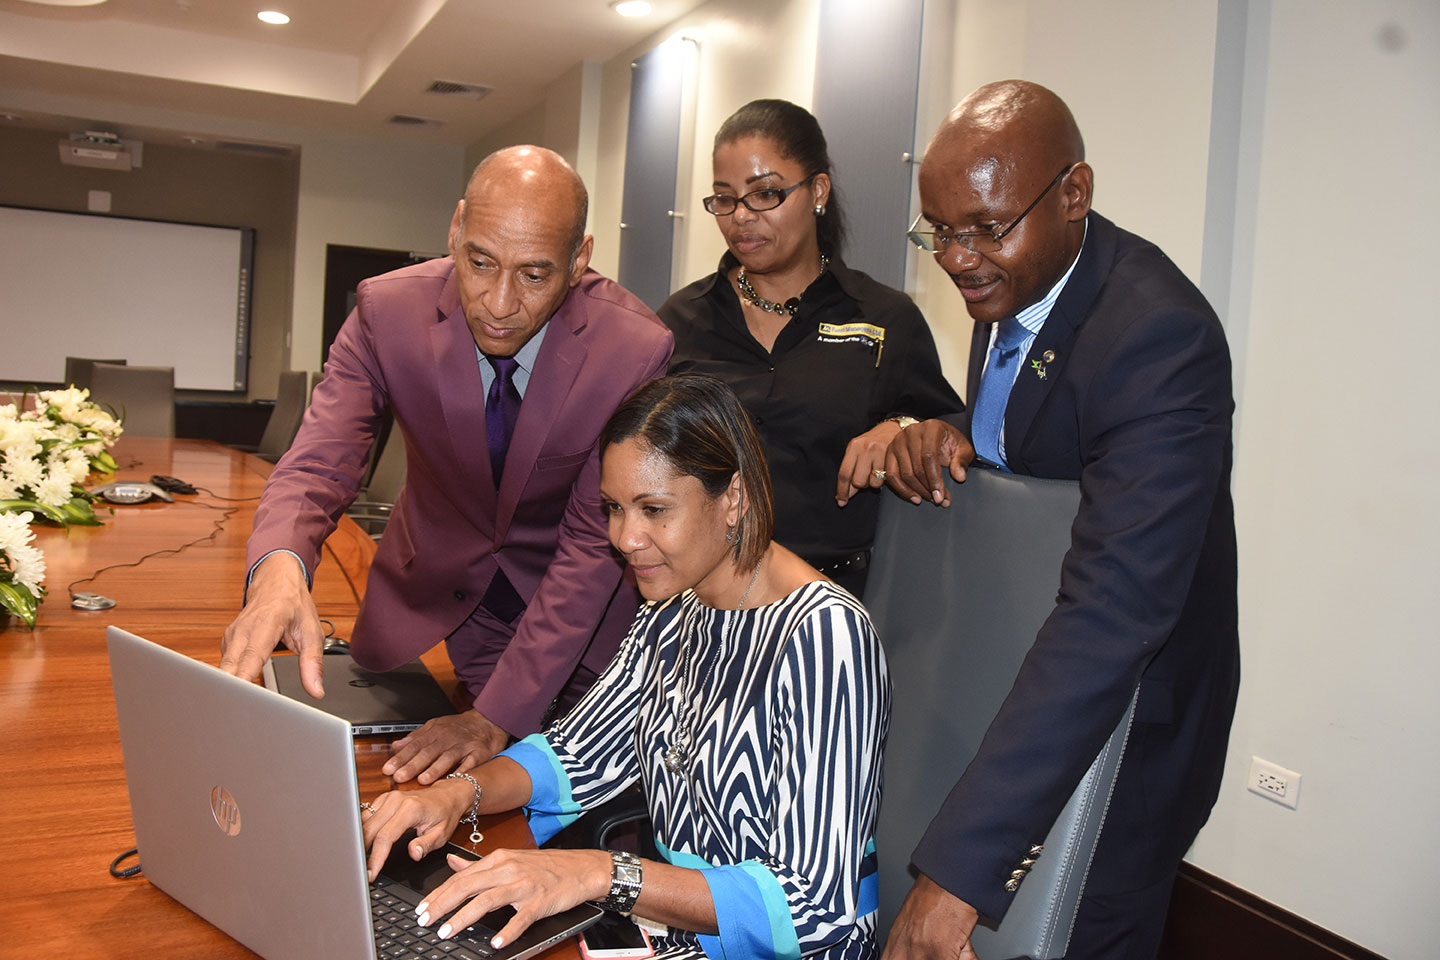 Allan Lewis (from left) managing director and Sharon Whitelocke, deputy general manager, JN Fund Managers, give a demonstration to Leesa Kow (seated), deputy managing director, JN Bank and Michael Powell, senior manager, security department, JN Group. They were viewing the new online platform launched by JN Fund Managers.